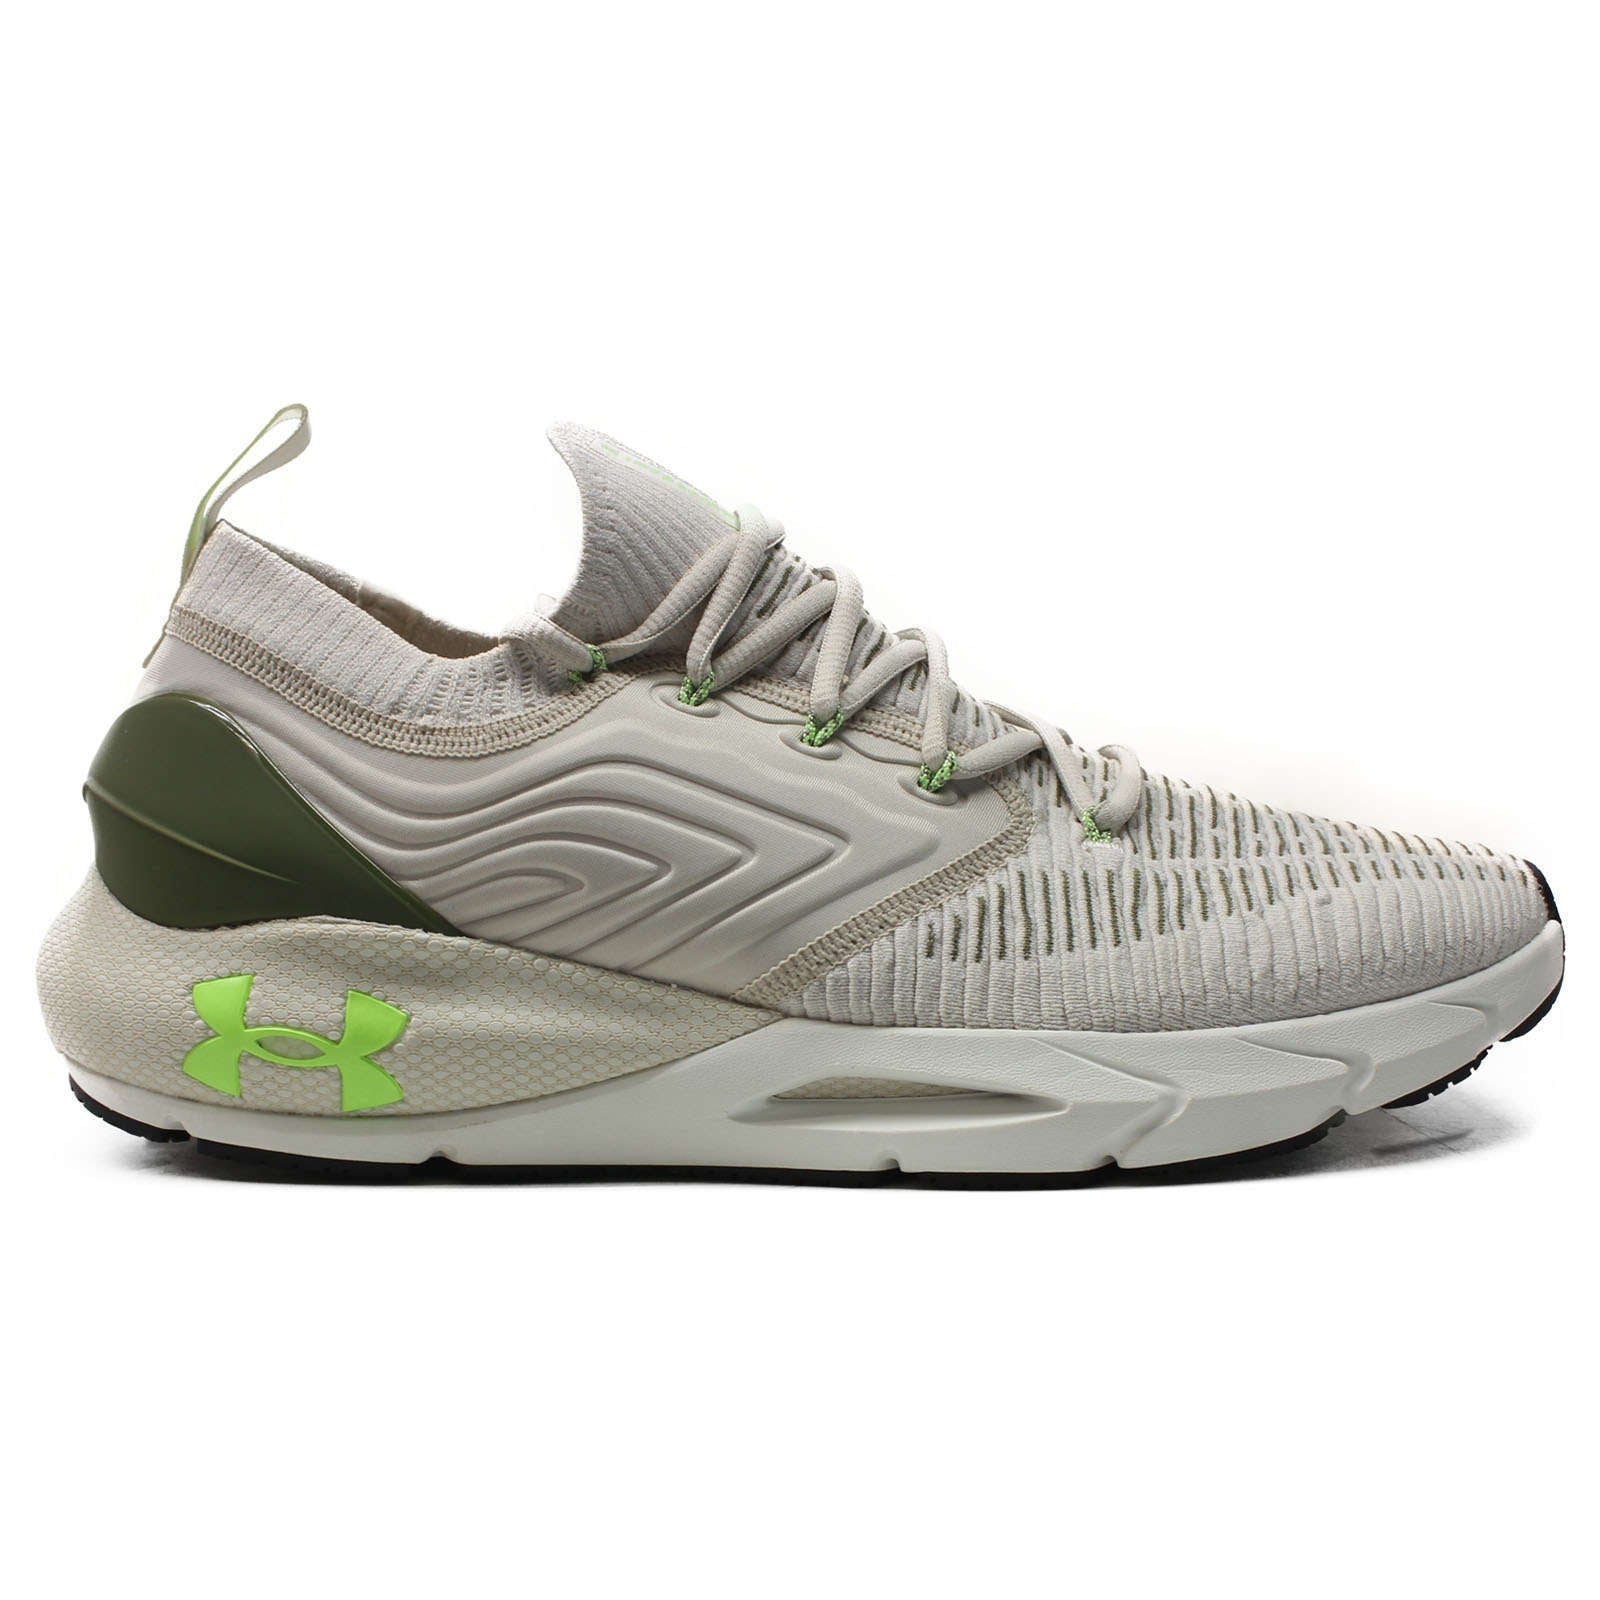 Under Armour HOVR Phantom 2 INKNT Synthetic Textile Men's Low-Top Trainers#color_brown green